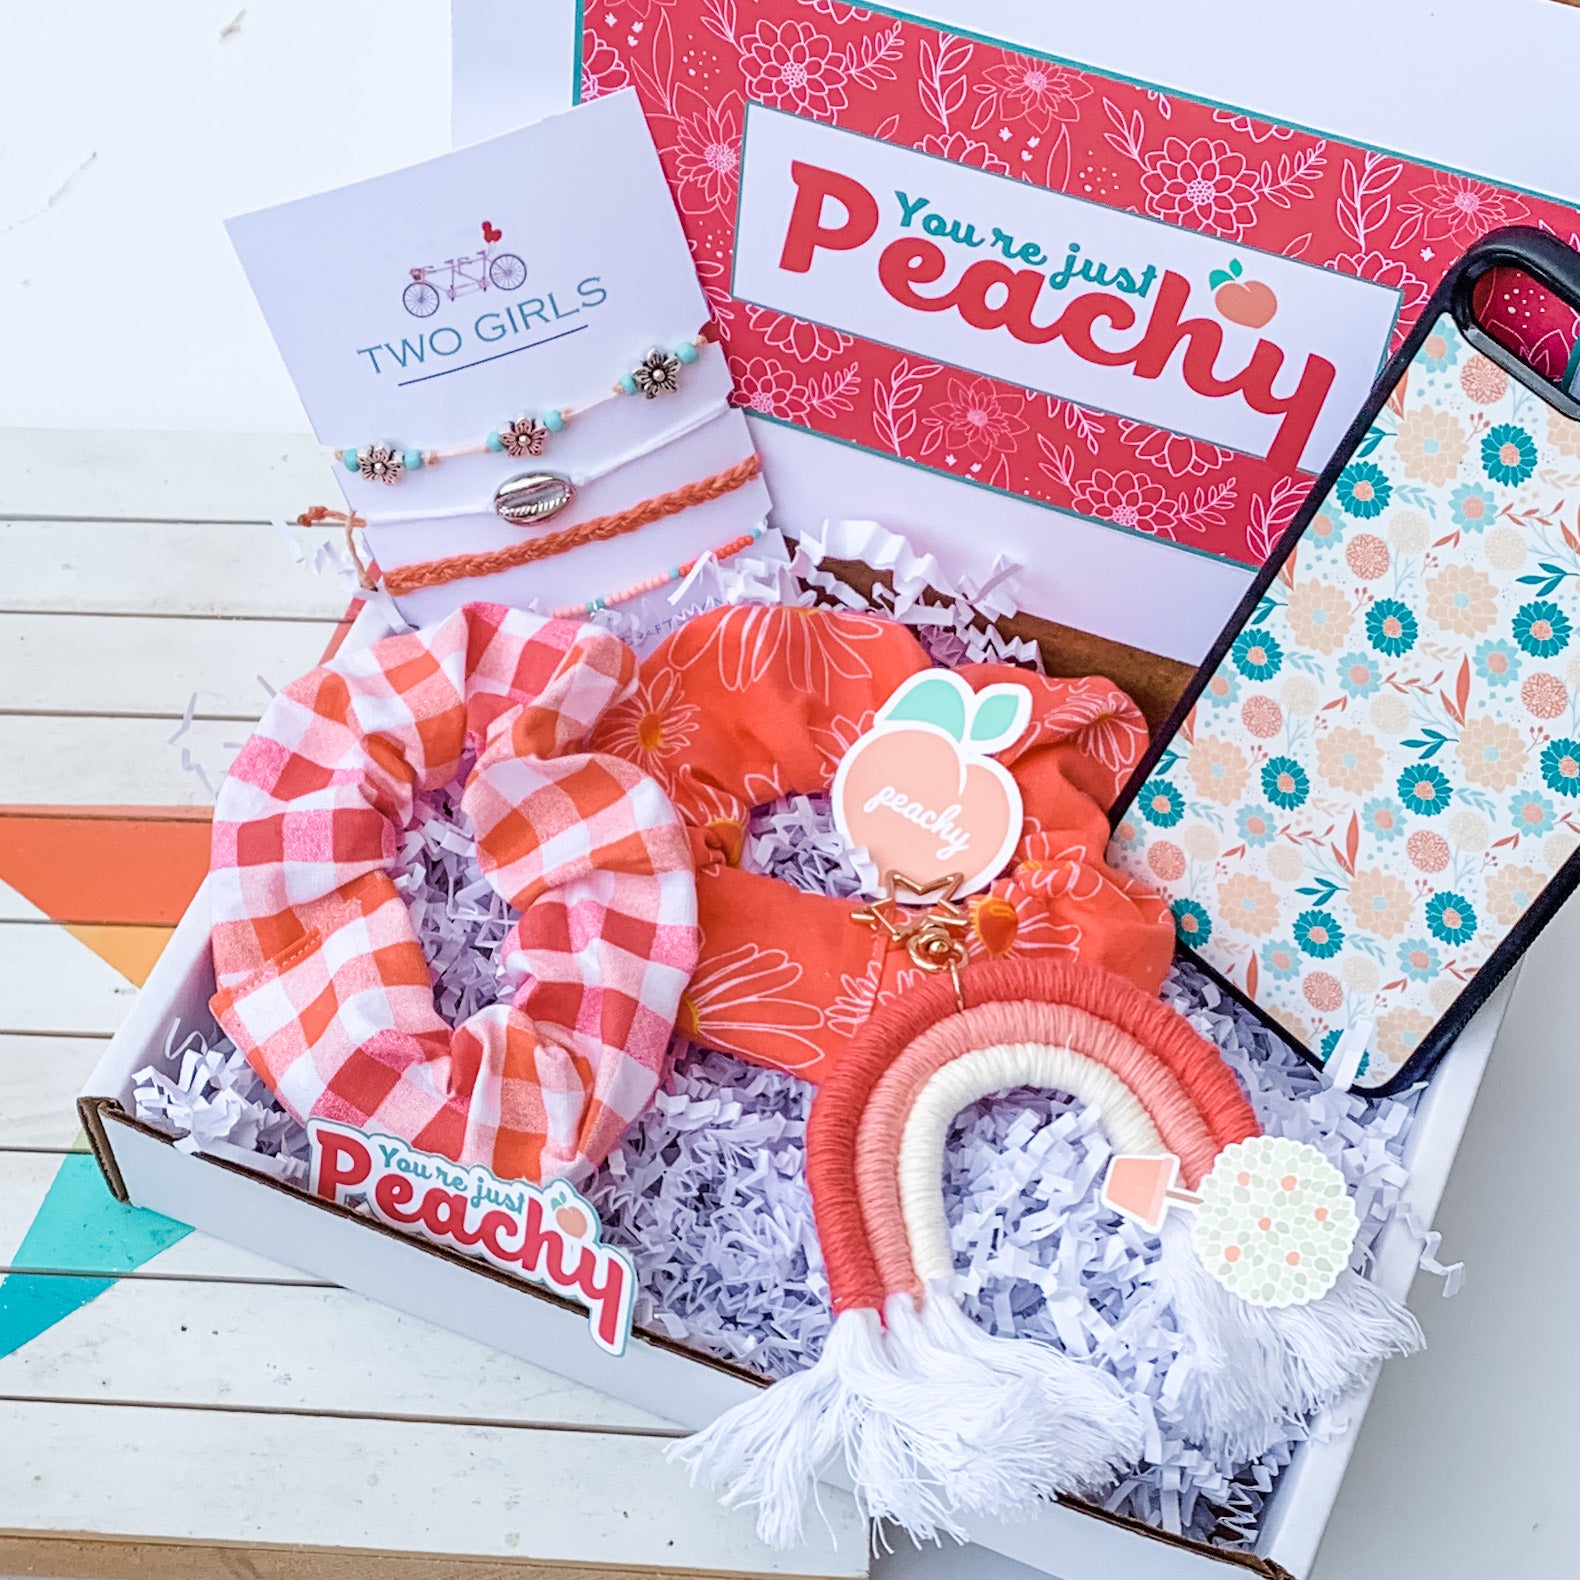 Just Peachy gift set – Two Girls Crafts